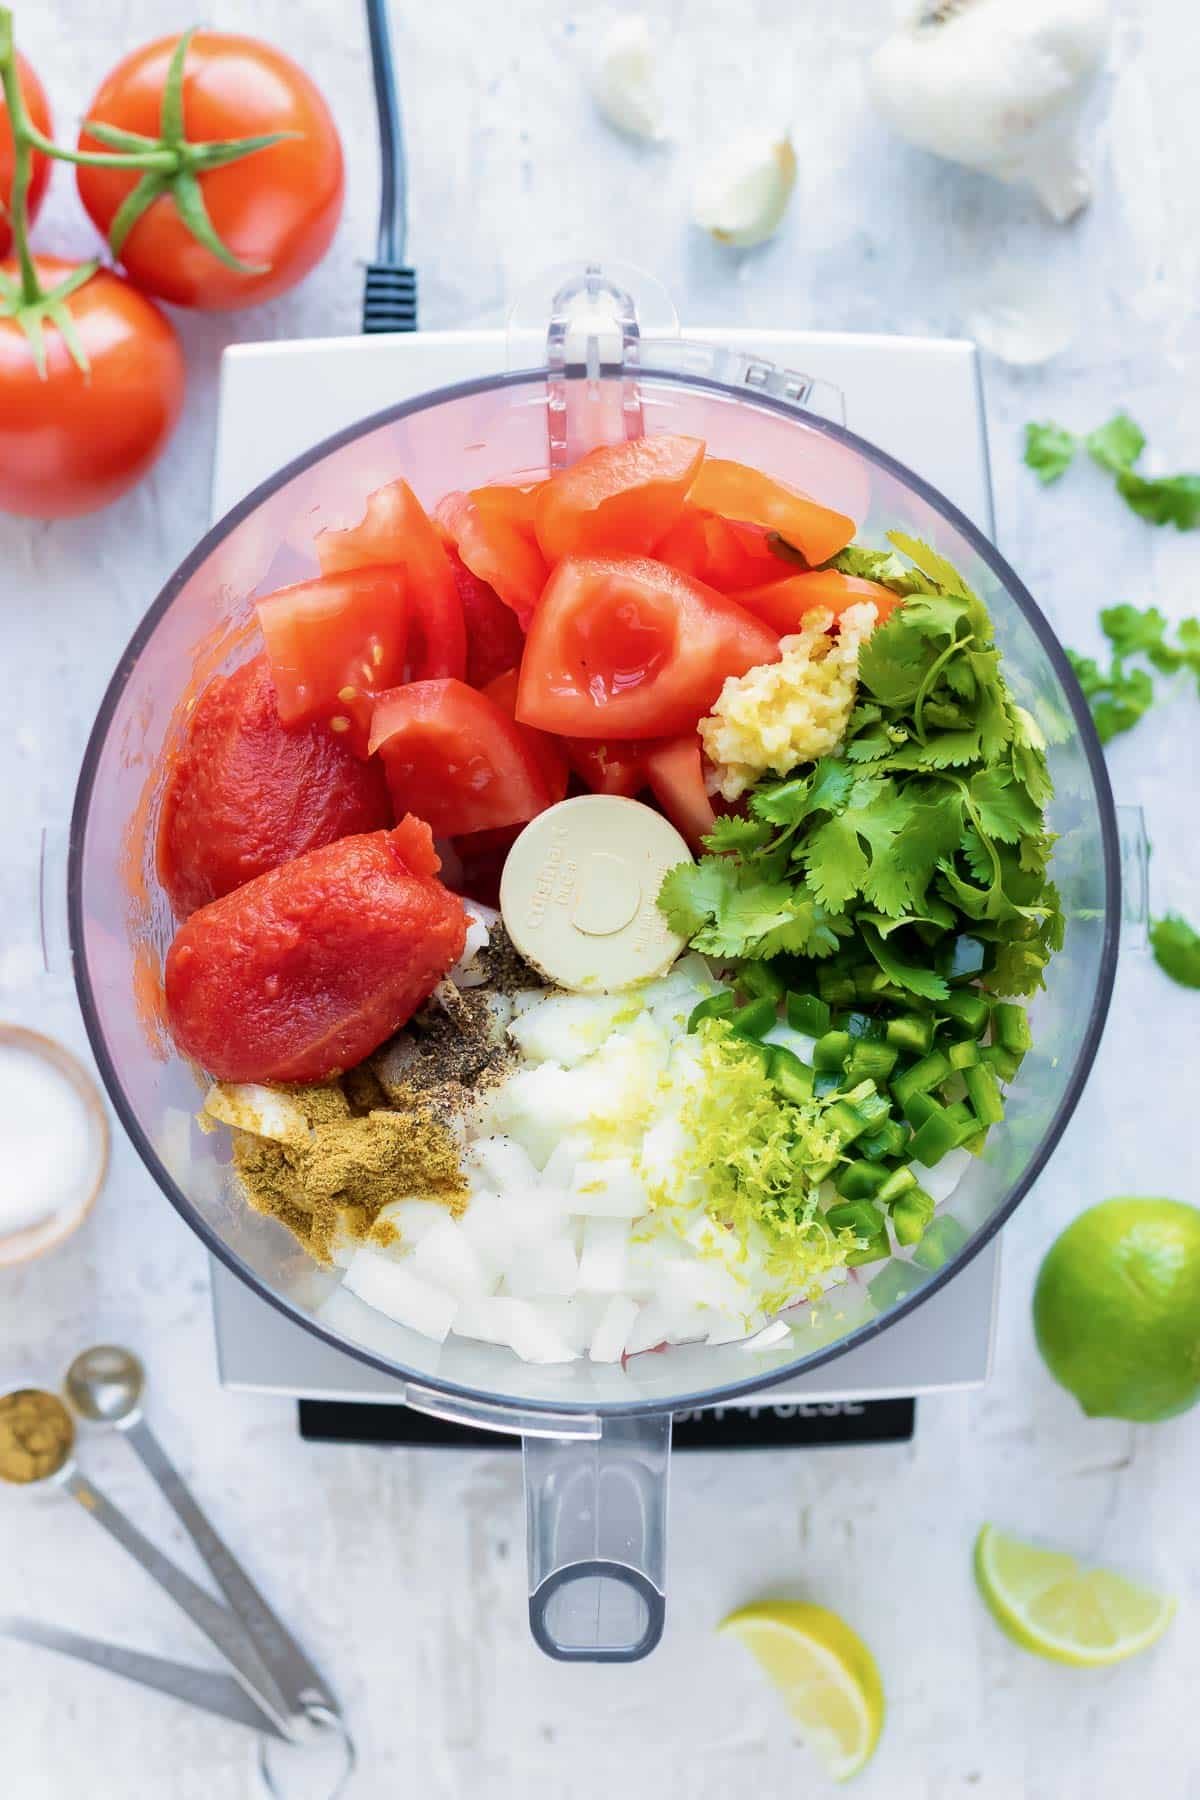 Salsa ingredients are added to a food processor.